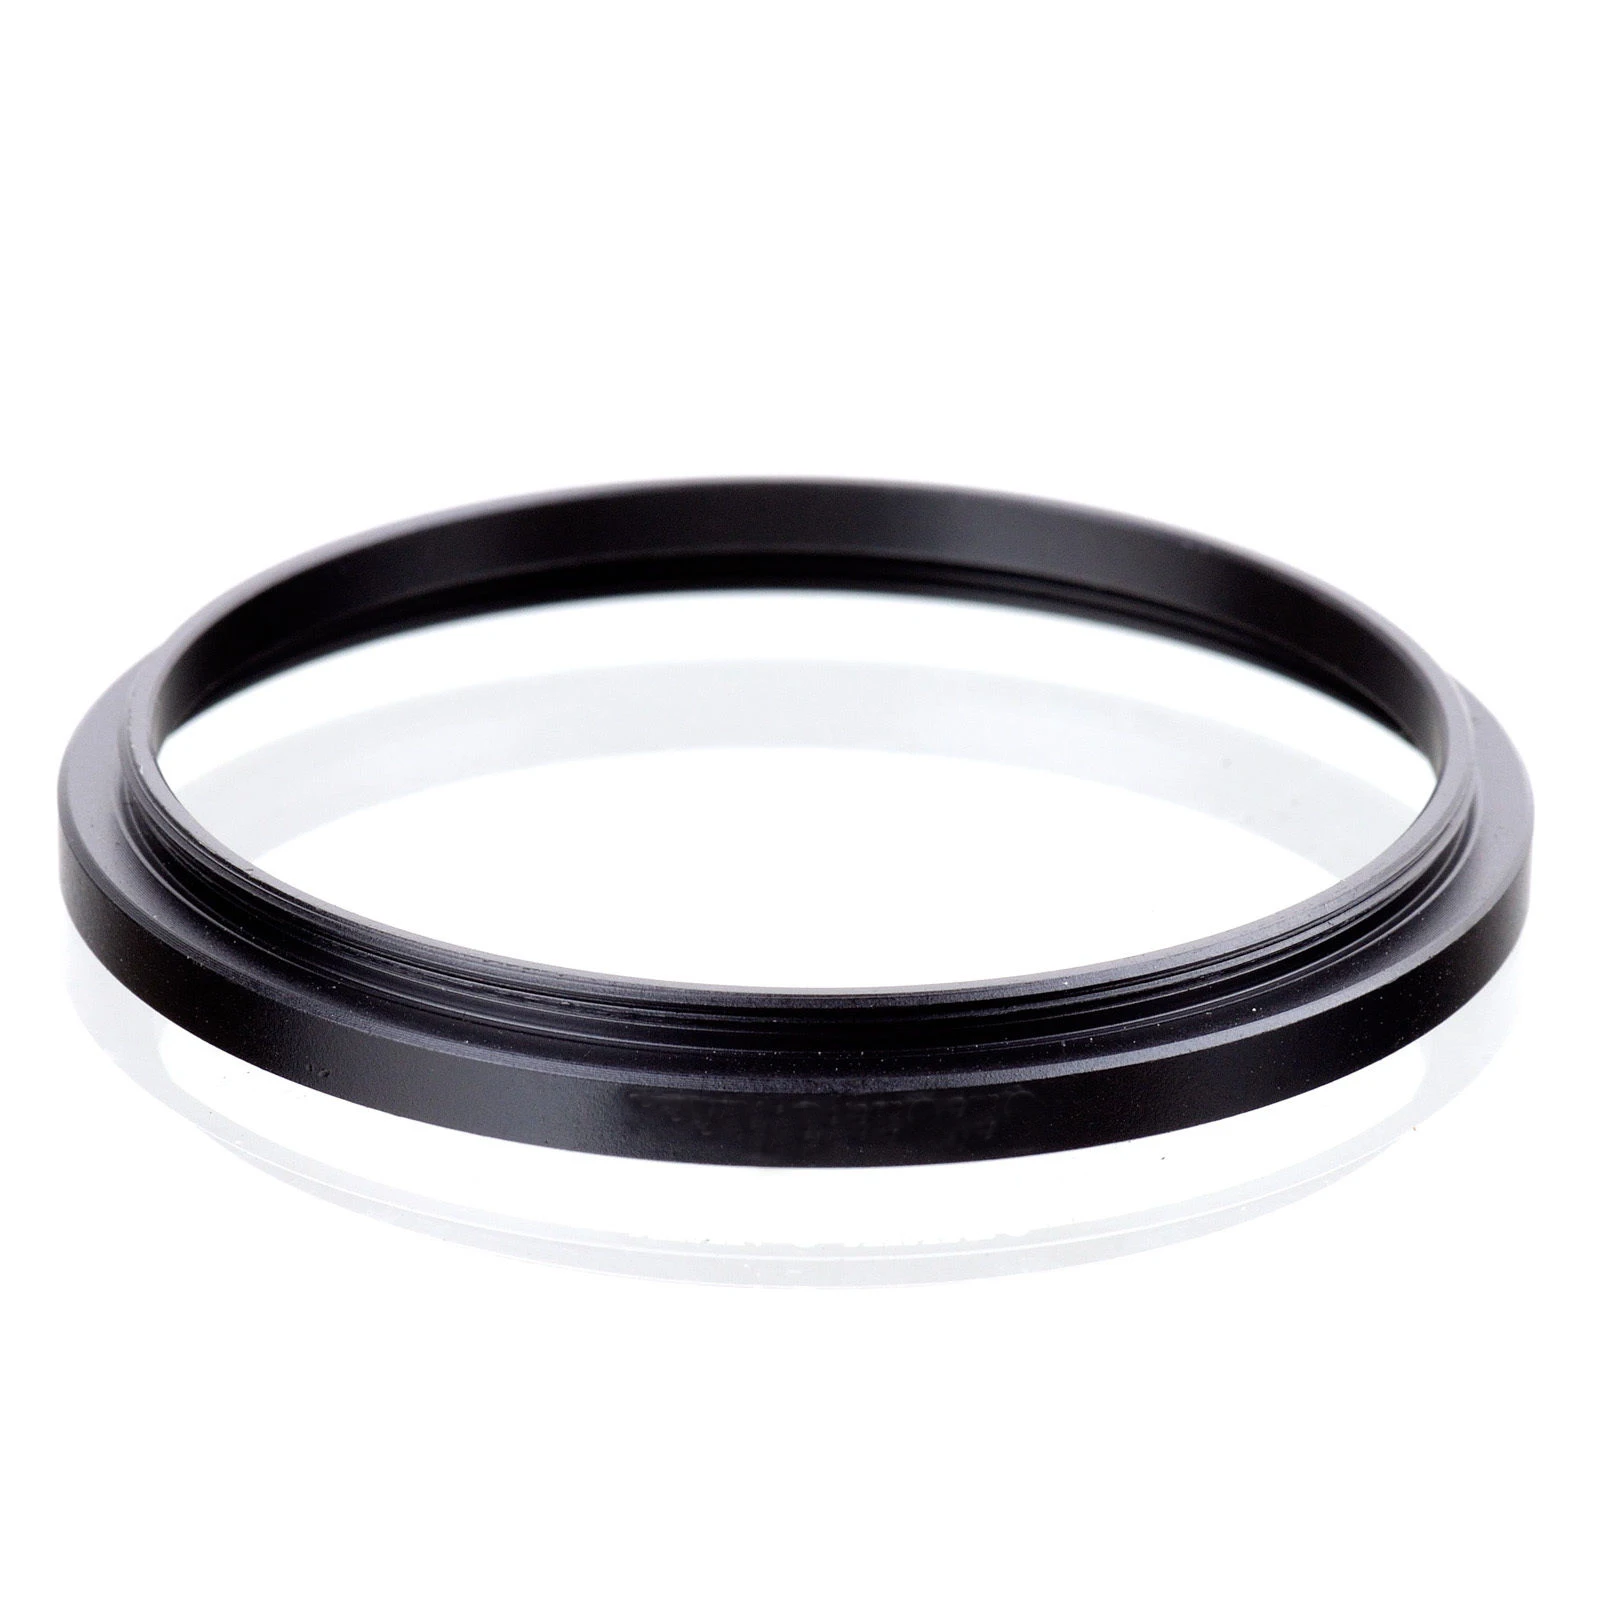 46mm-55mm 46-55 mm 46 to 55 mm 46mm to 55mm Step UP Ring Filter Adapter